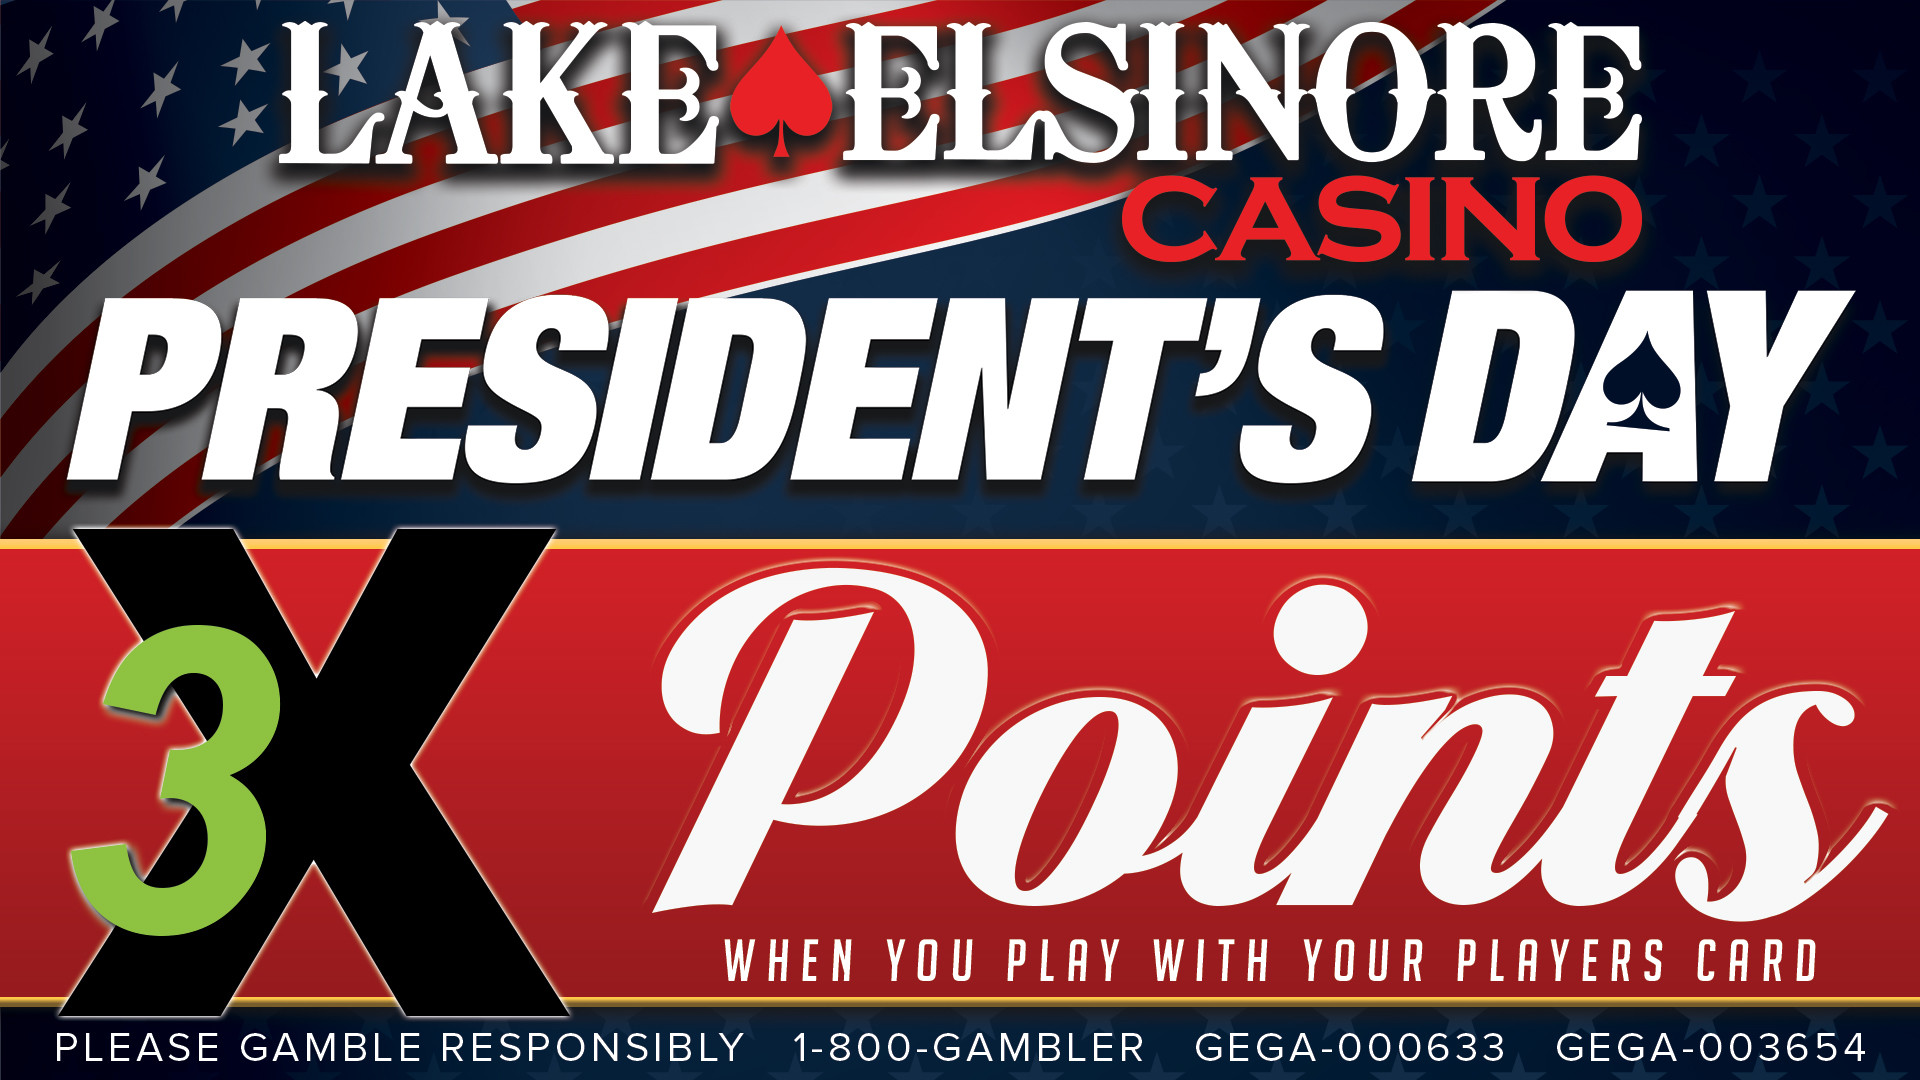 1920x1080 3X Points All Day – President's Day